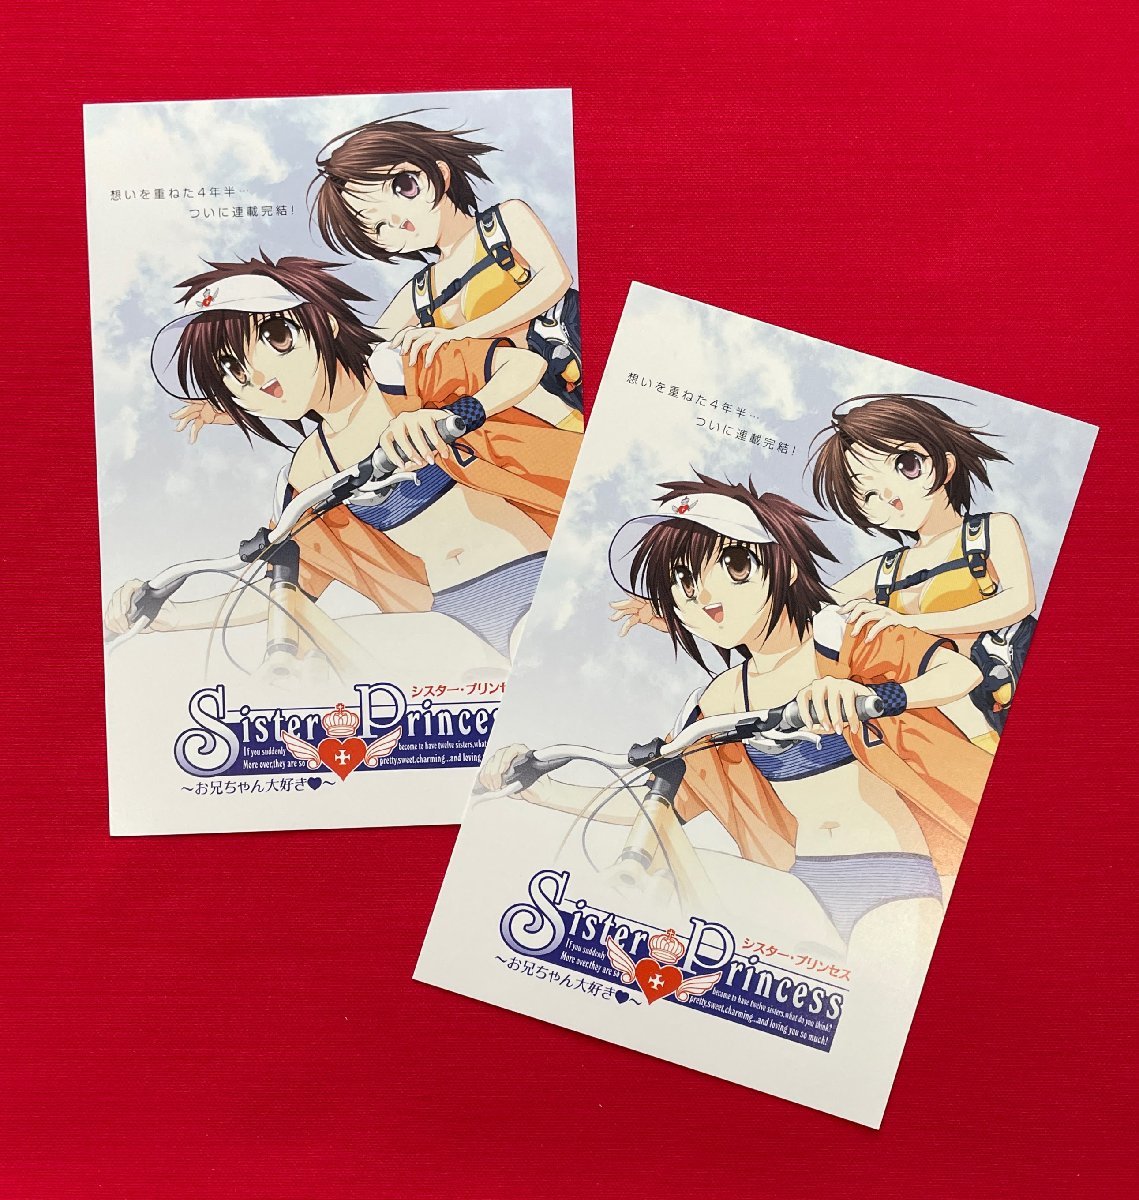 si Star * Princess ~ elder brother Chan large liking ~ postcard 1 kind 2 pieces set shop front for sales promotion not for sale at that time mono rare A12763